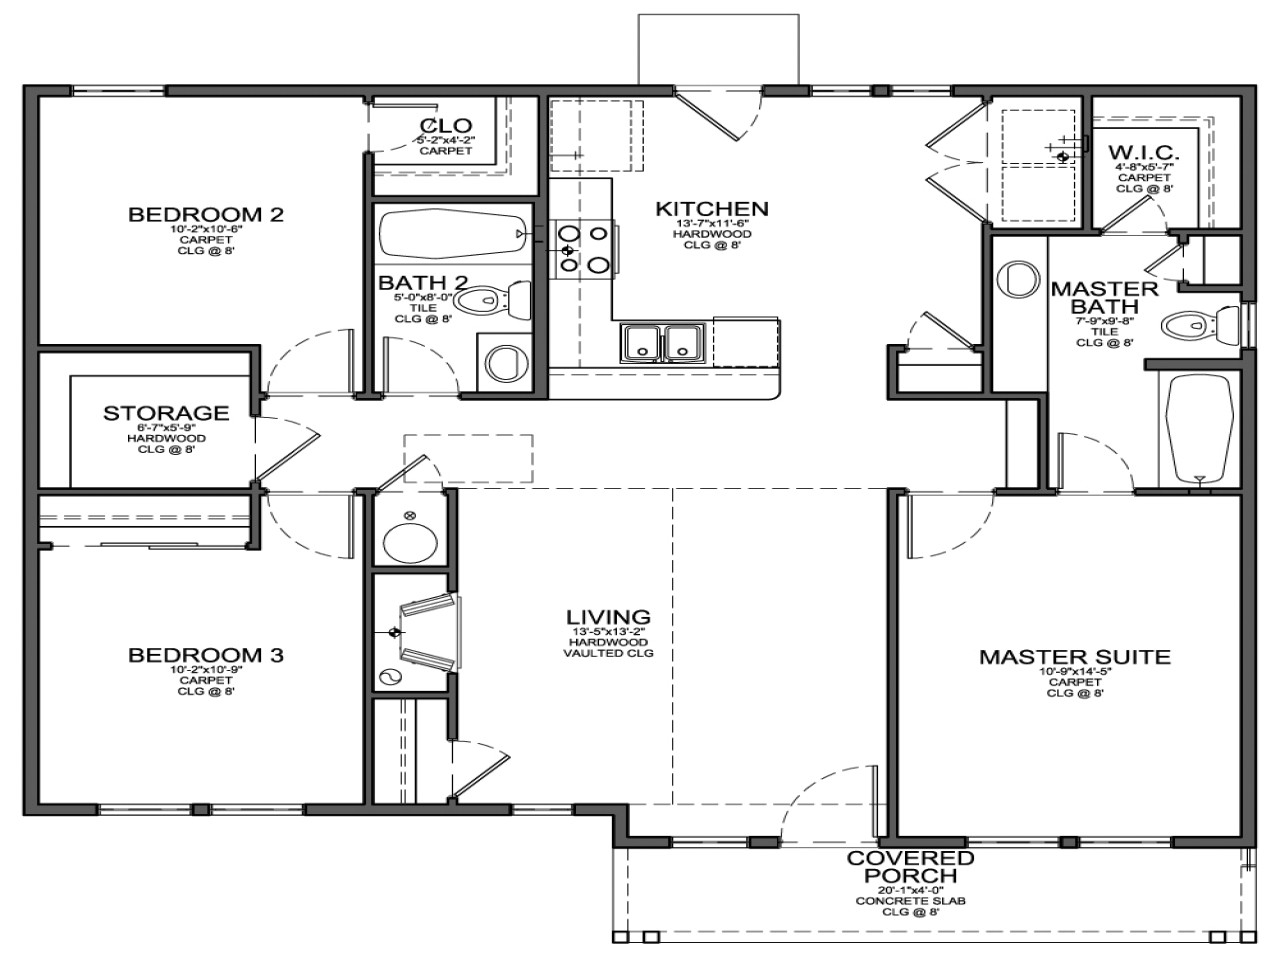 8c9206d13ffee26a 3 bedroom house layouts small 3 bedroom house floor plans